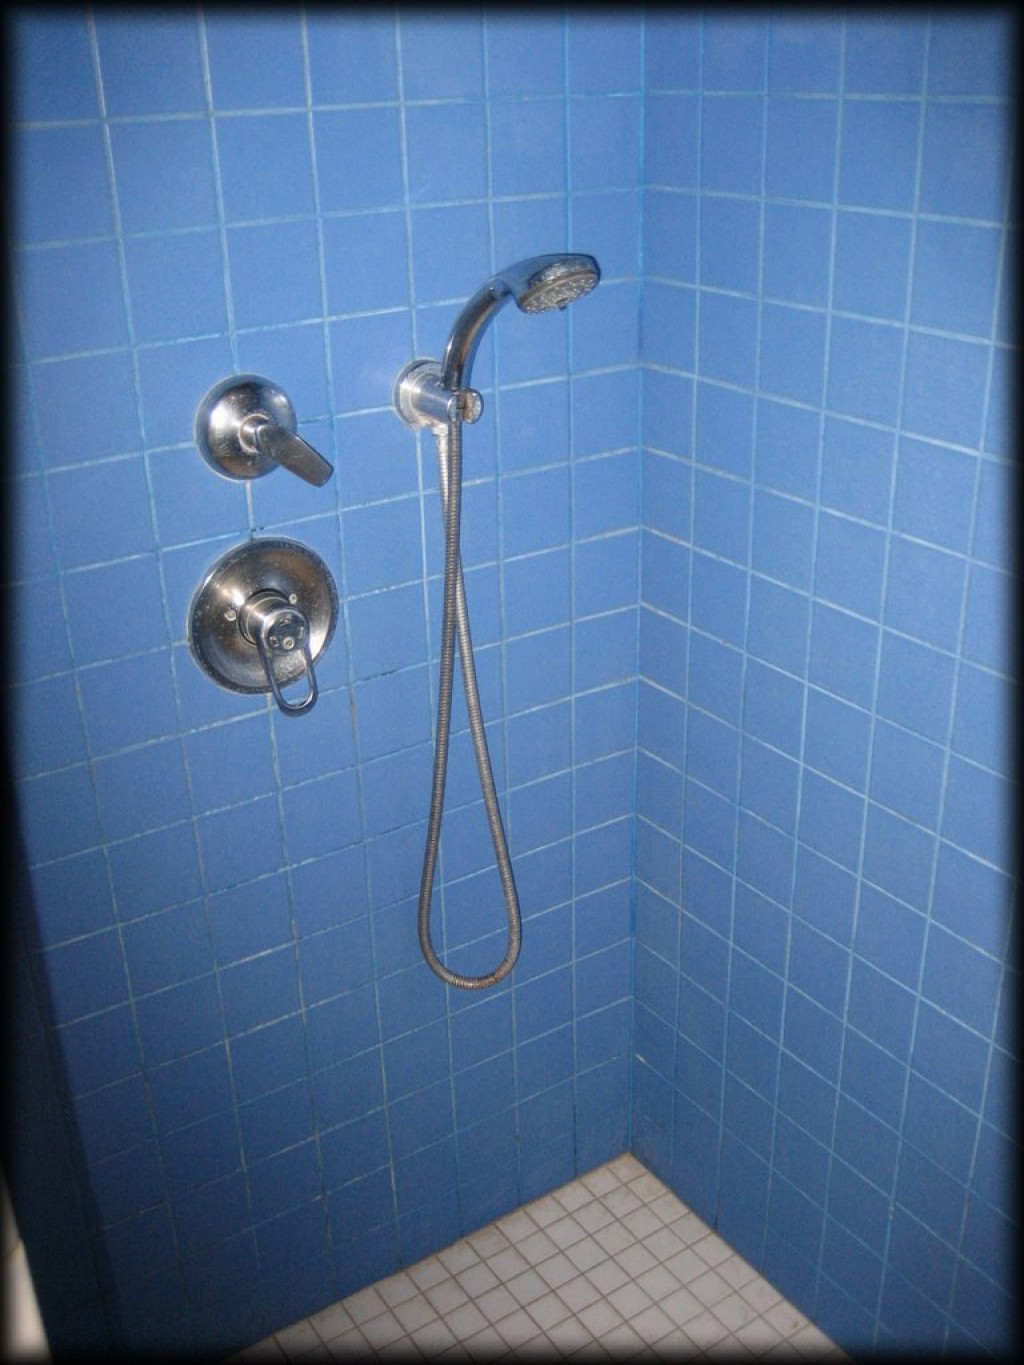 The shower had lots of hot water and great water pressure.